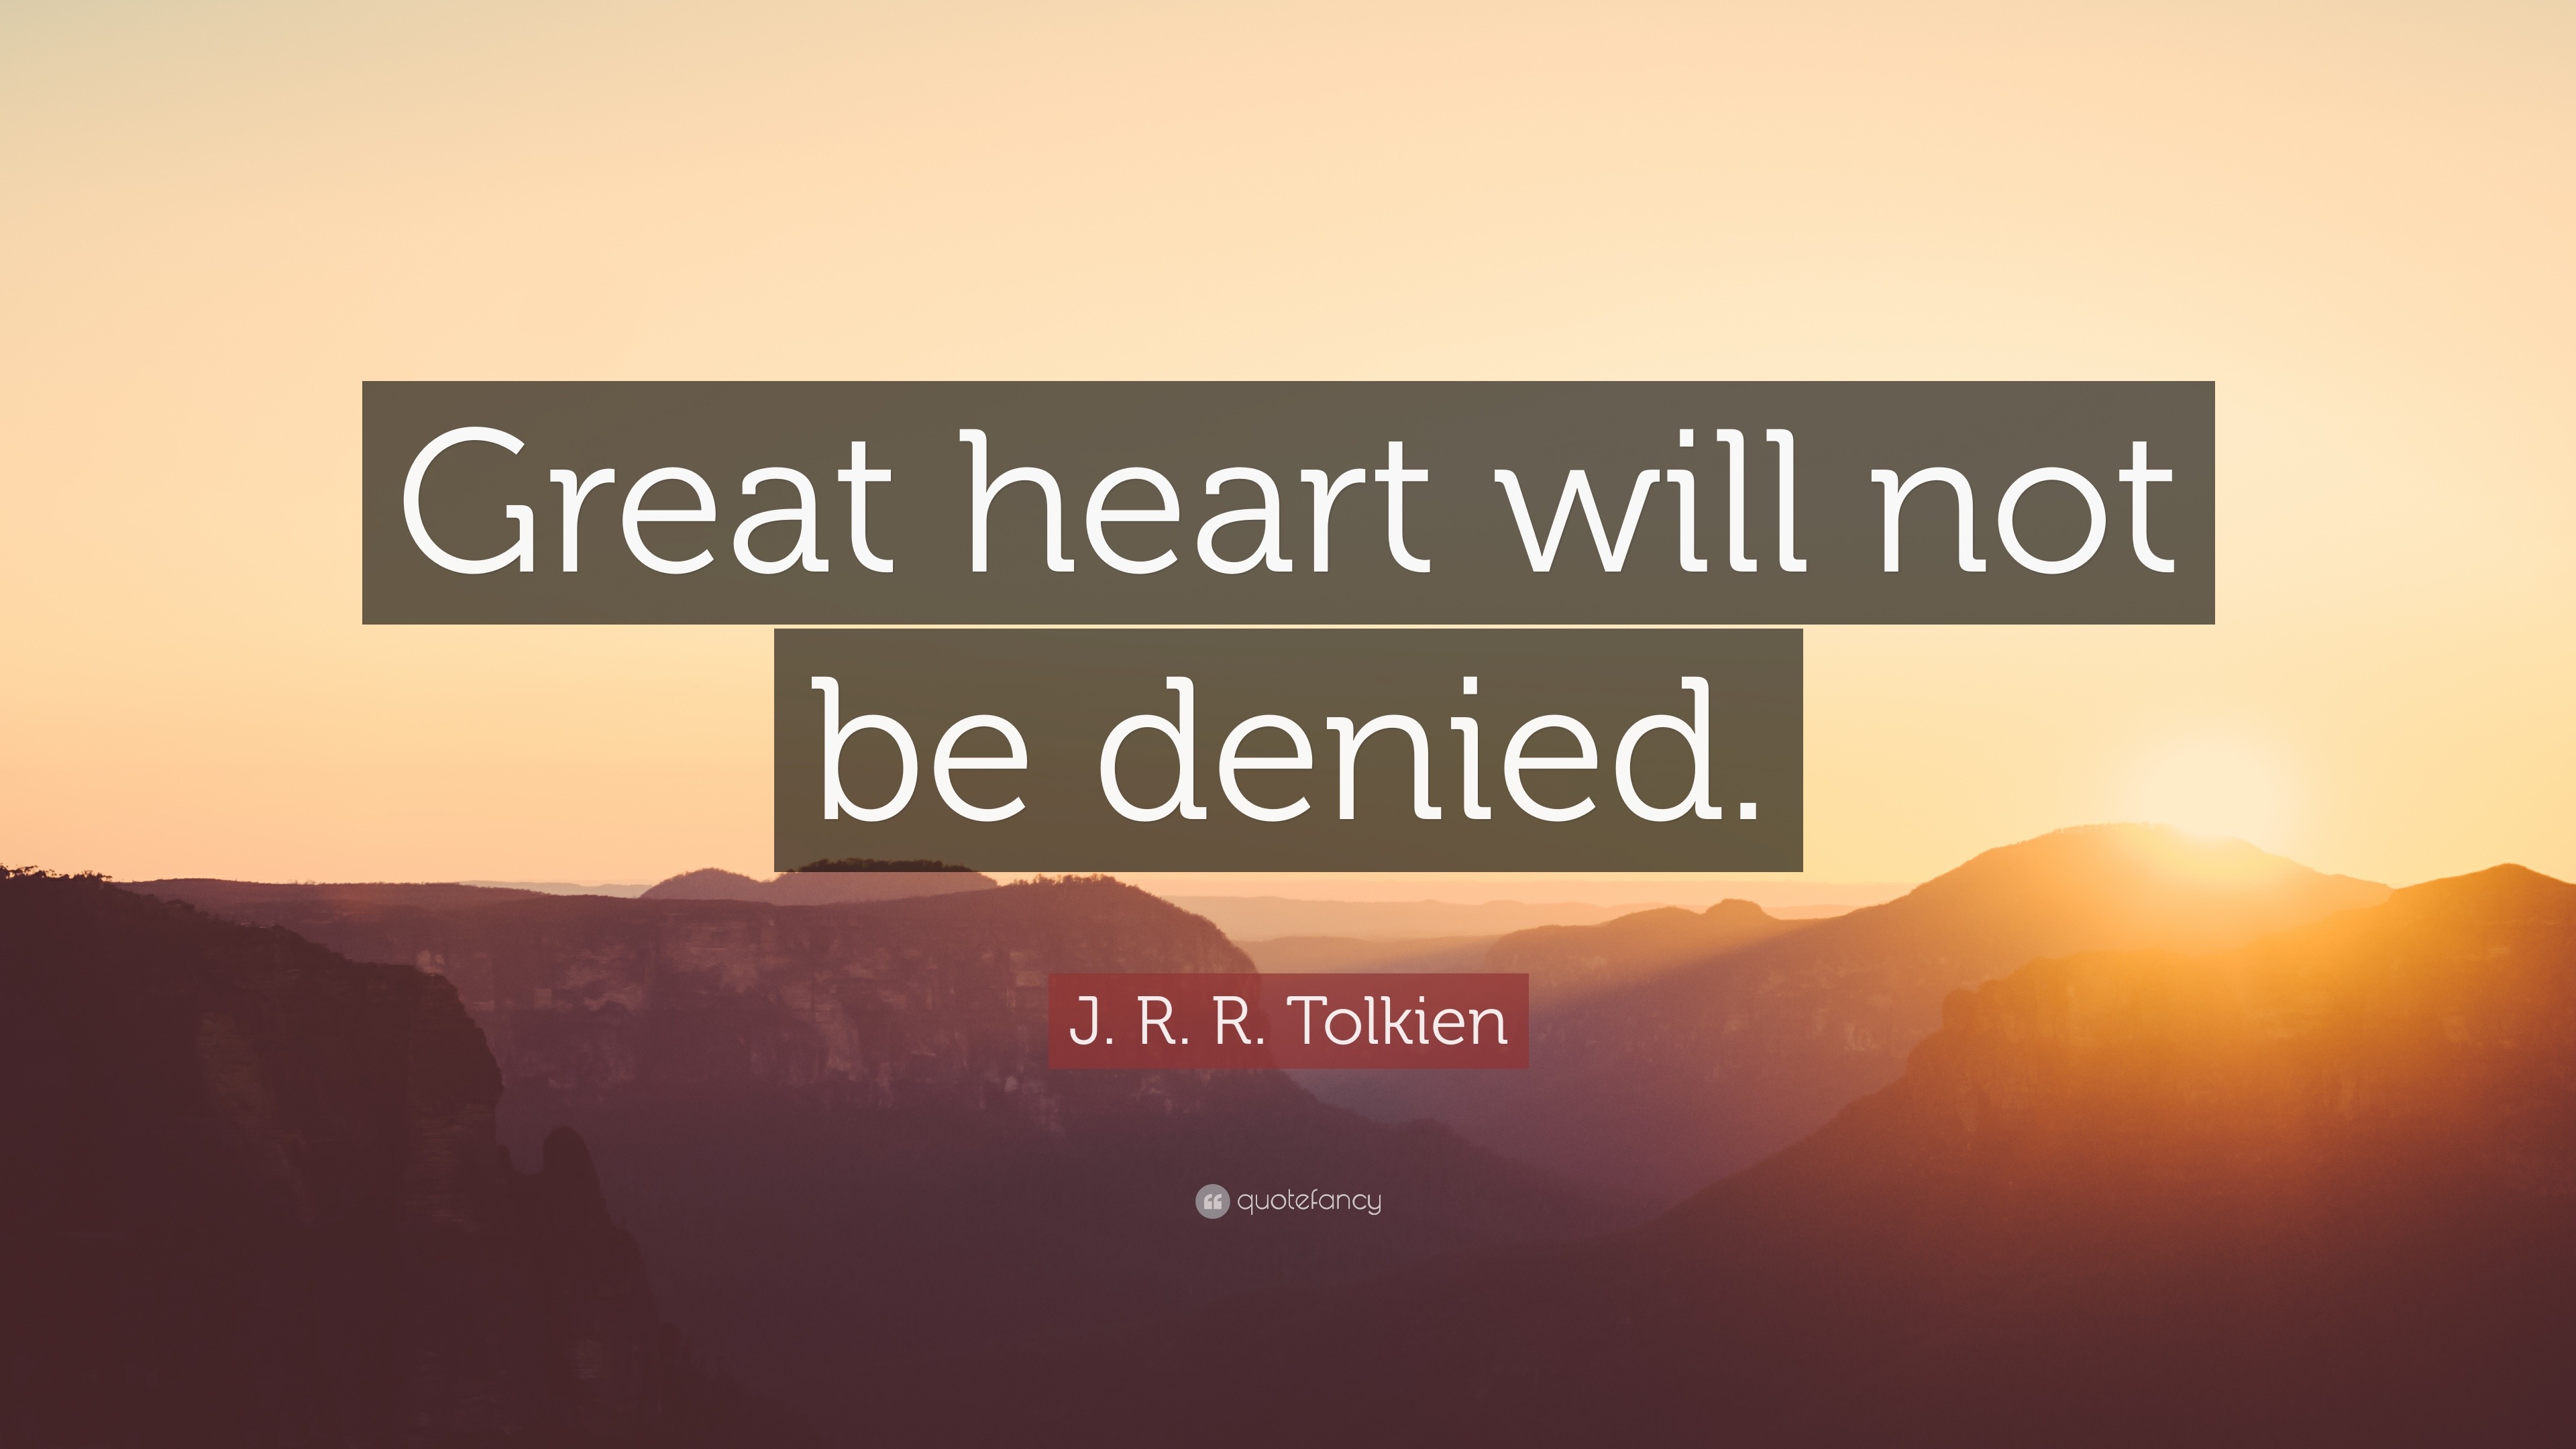 J R R Tolkien Quote “Great heart will not be denied ”